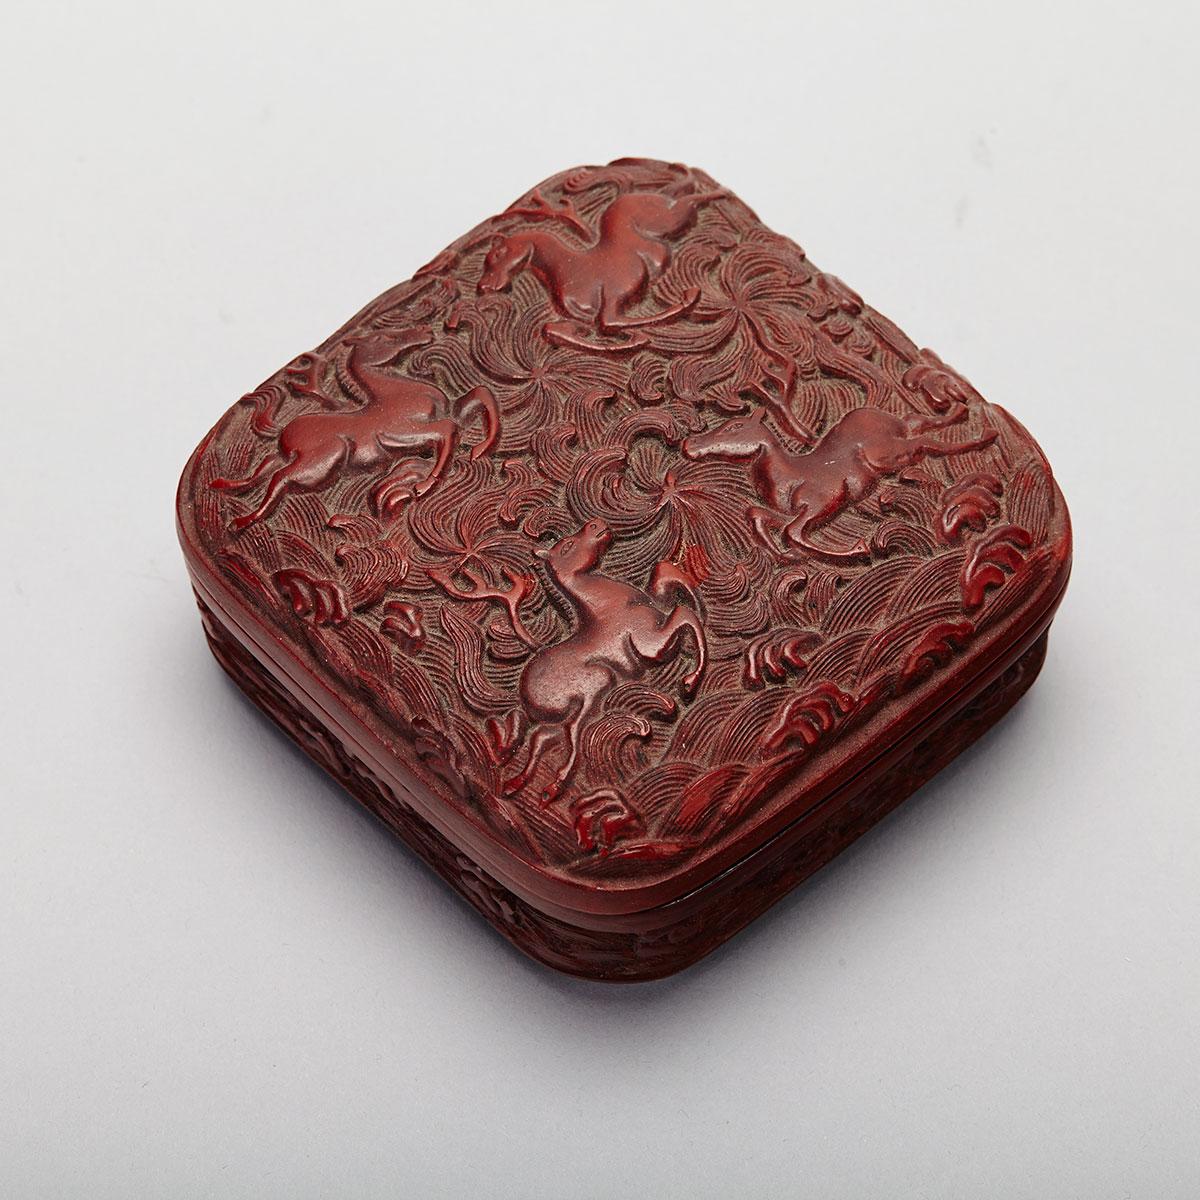 Small Lacquer Carved Box and Cover